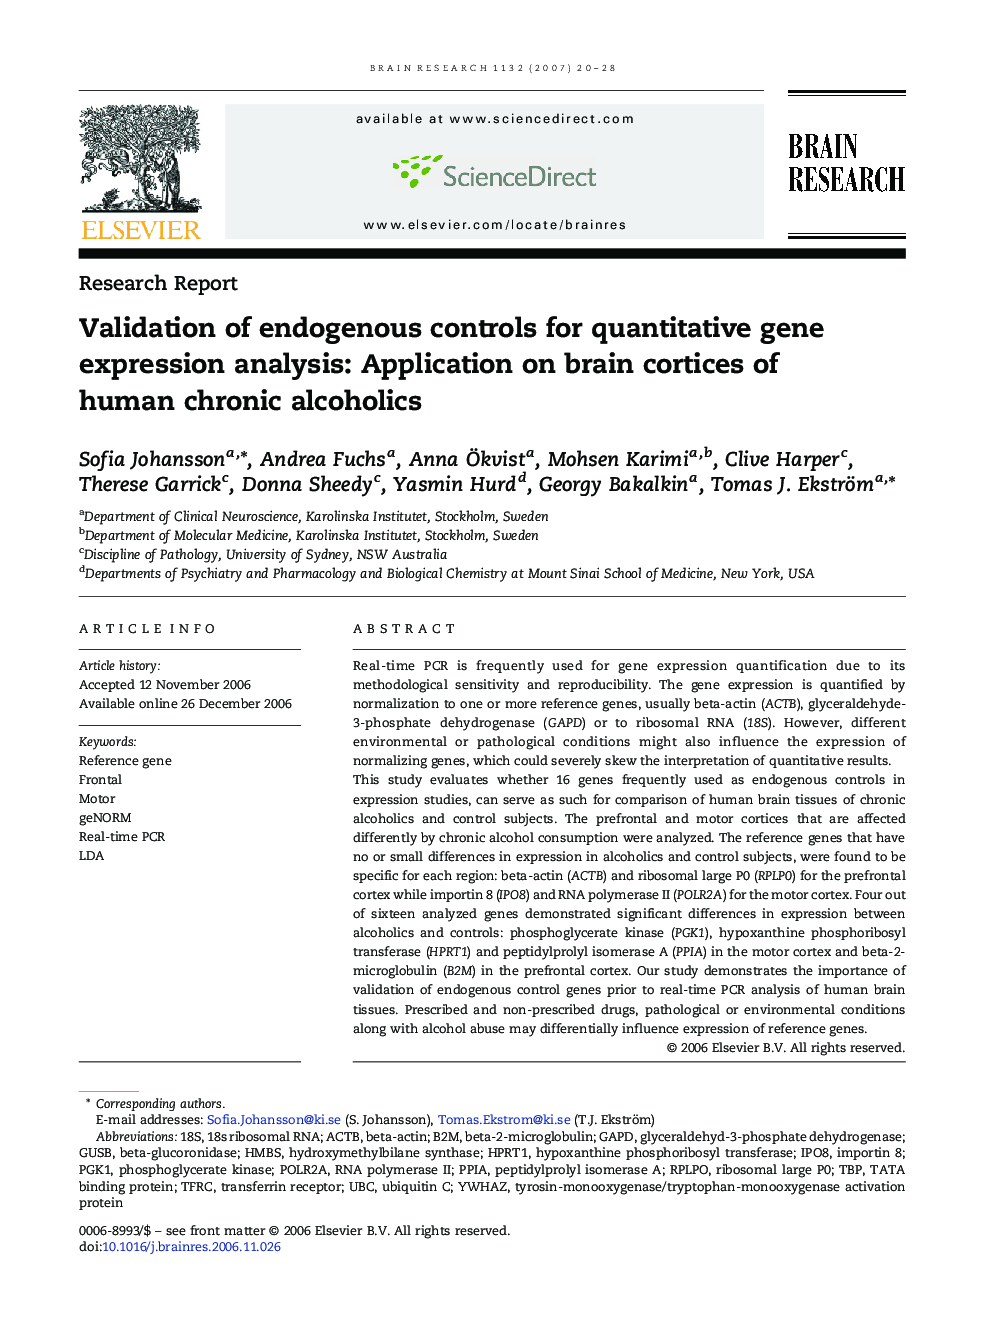 Validation of endogenous controls for quantitative gene expression analysis: Application on brain cortices of human chronic alcoholics